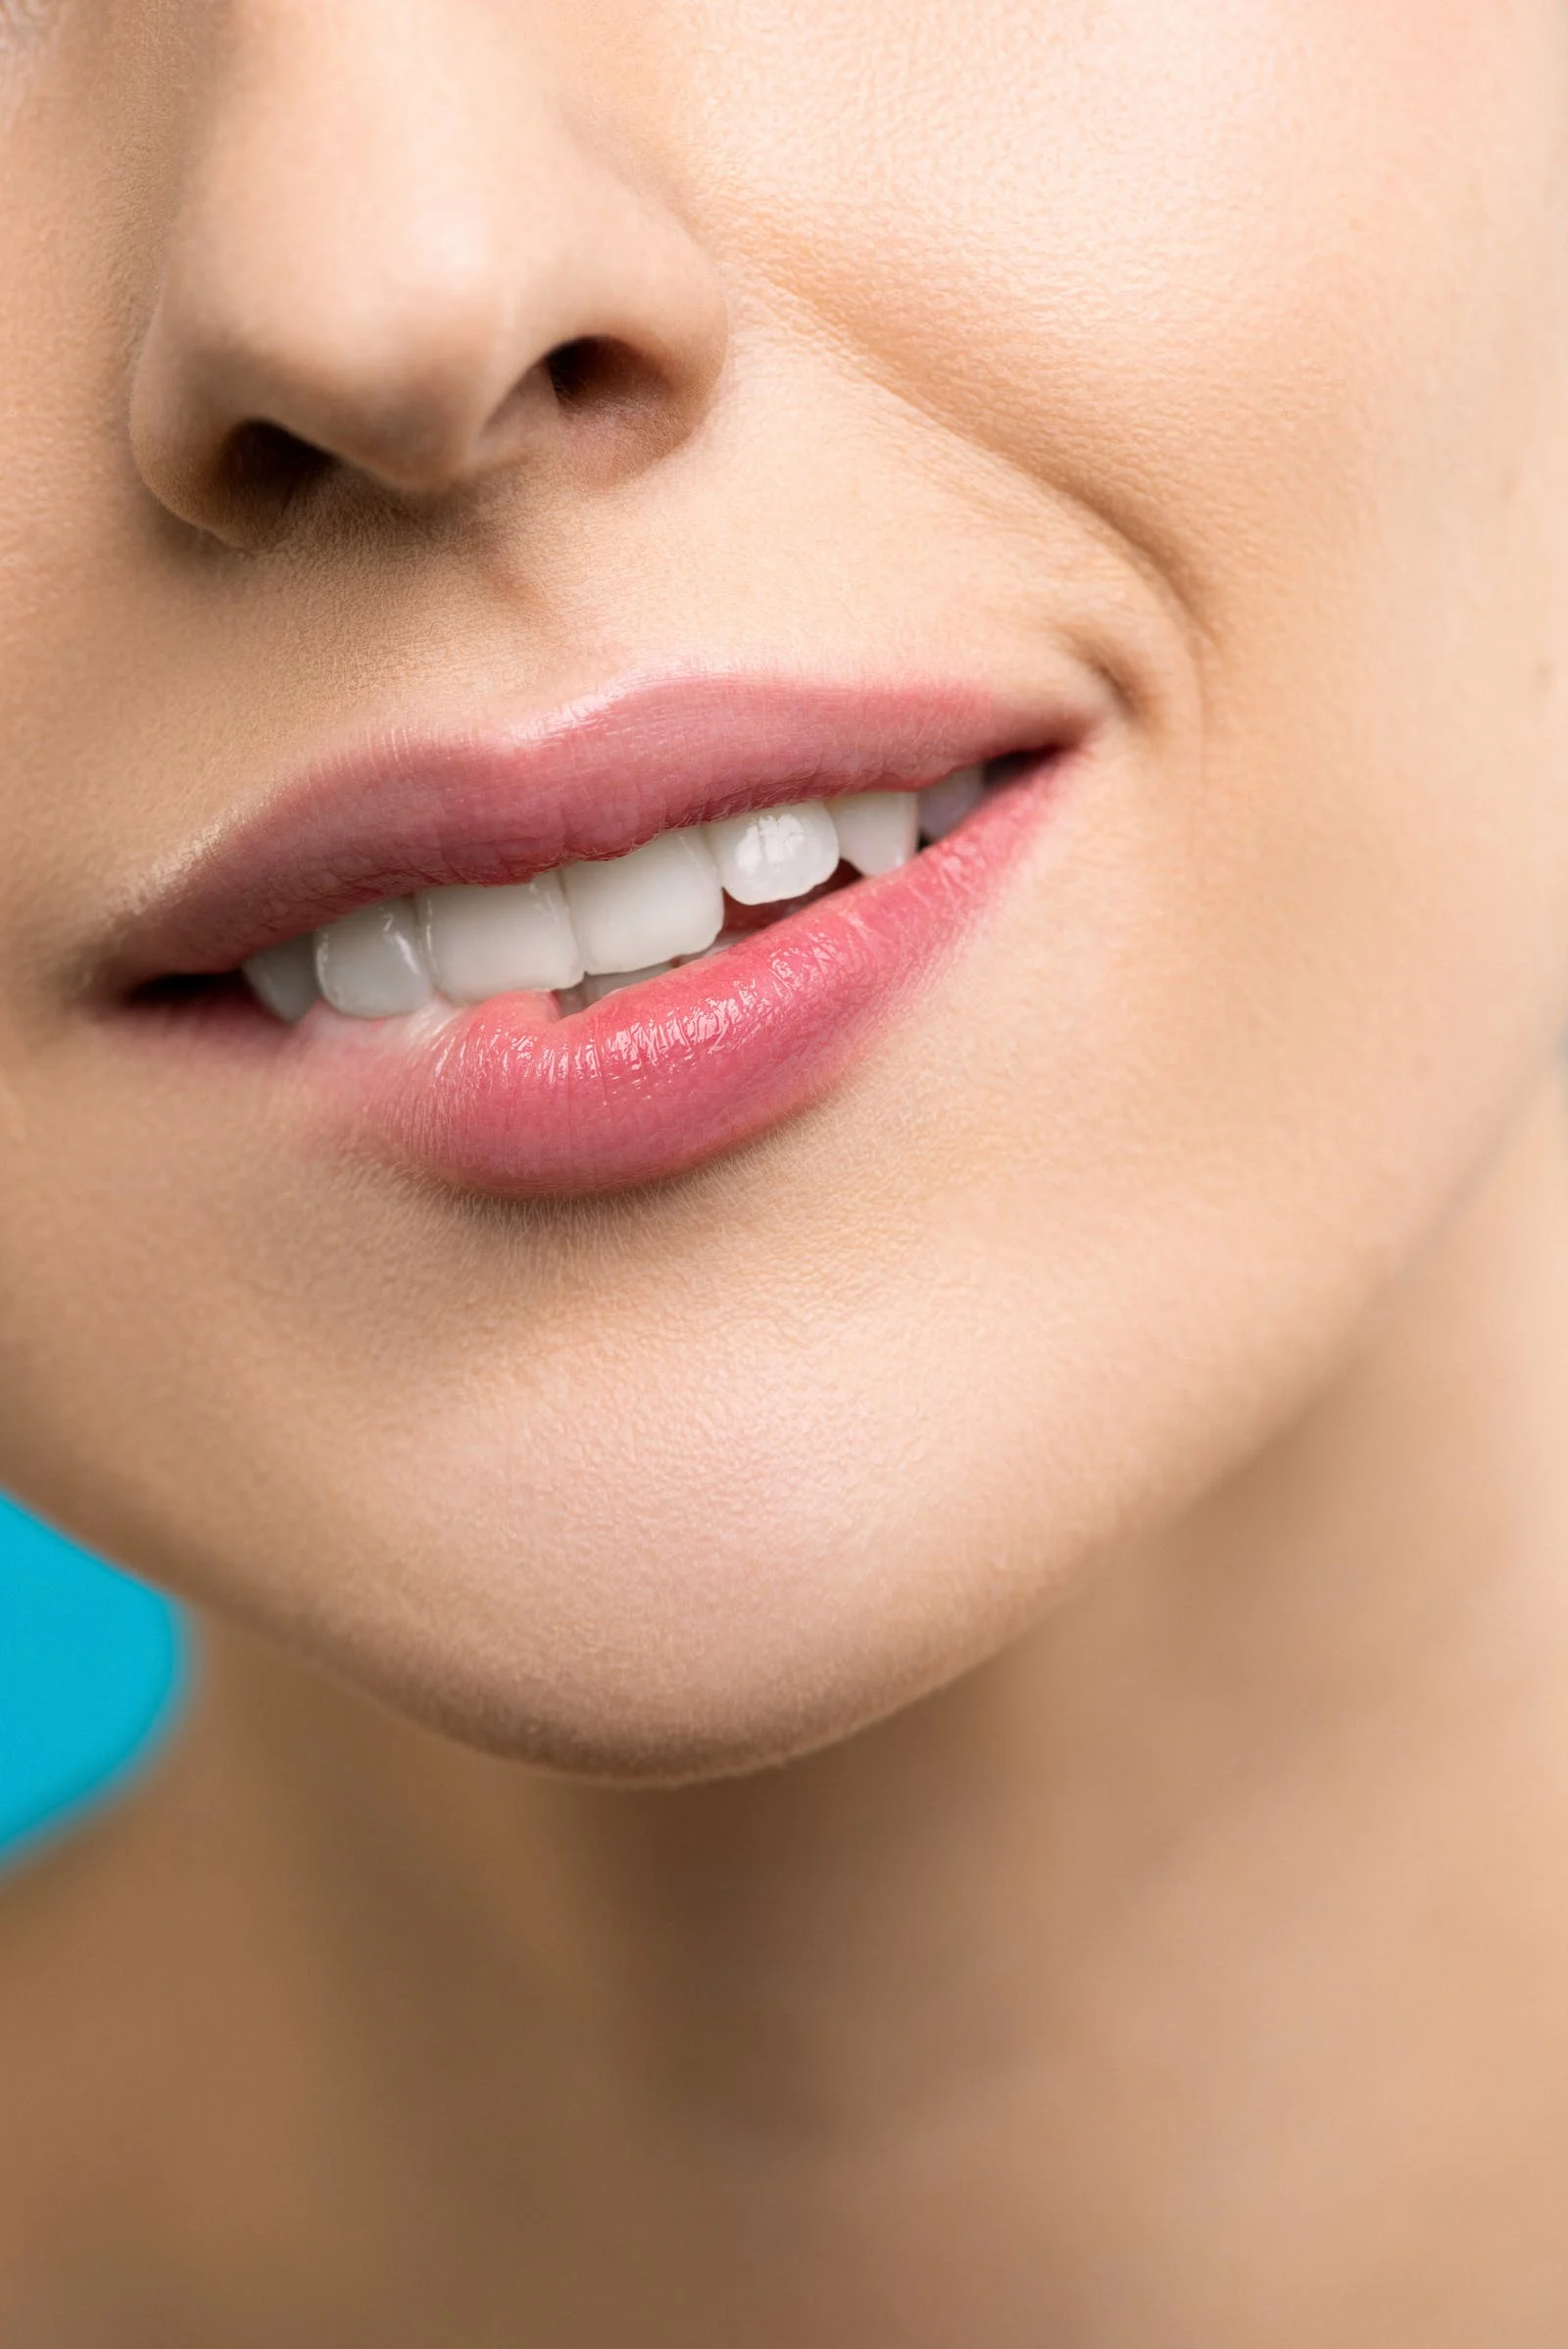 Get a Brighter Smile with GlossRay Whitening Teeth